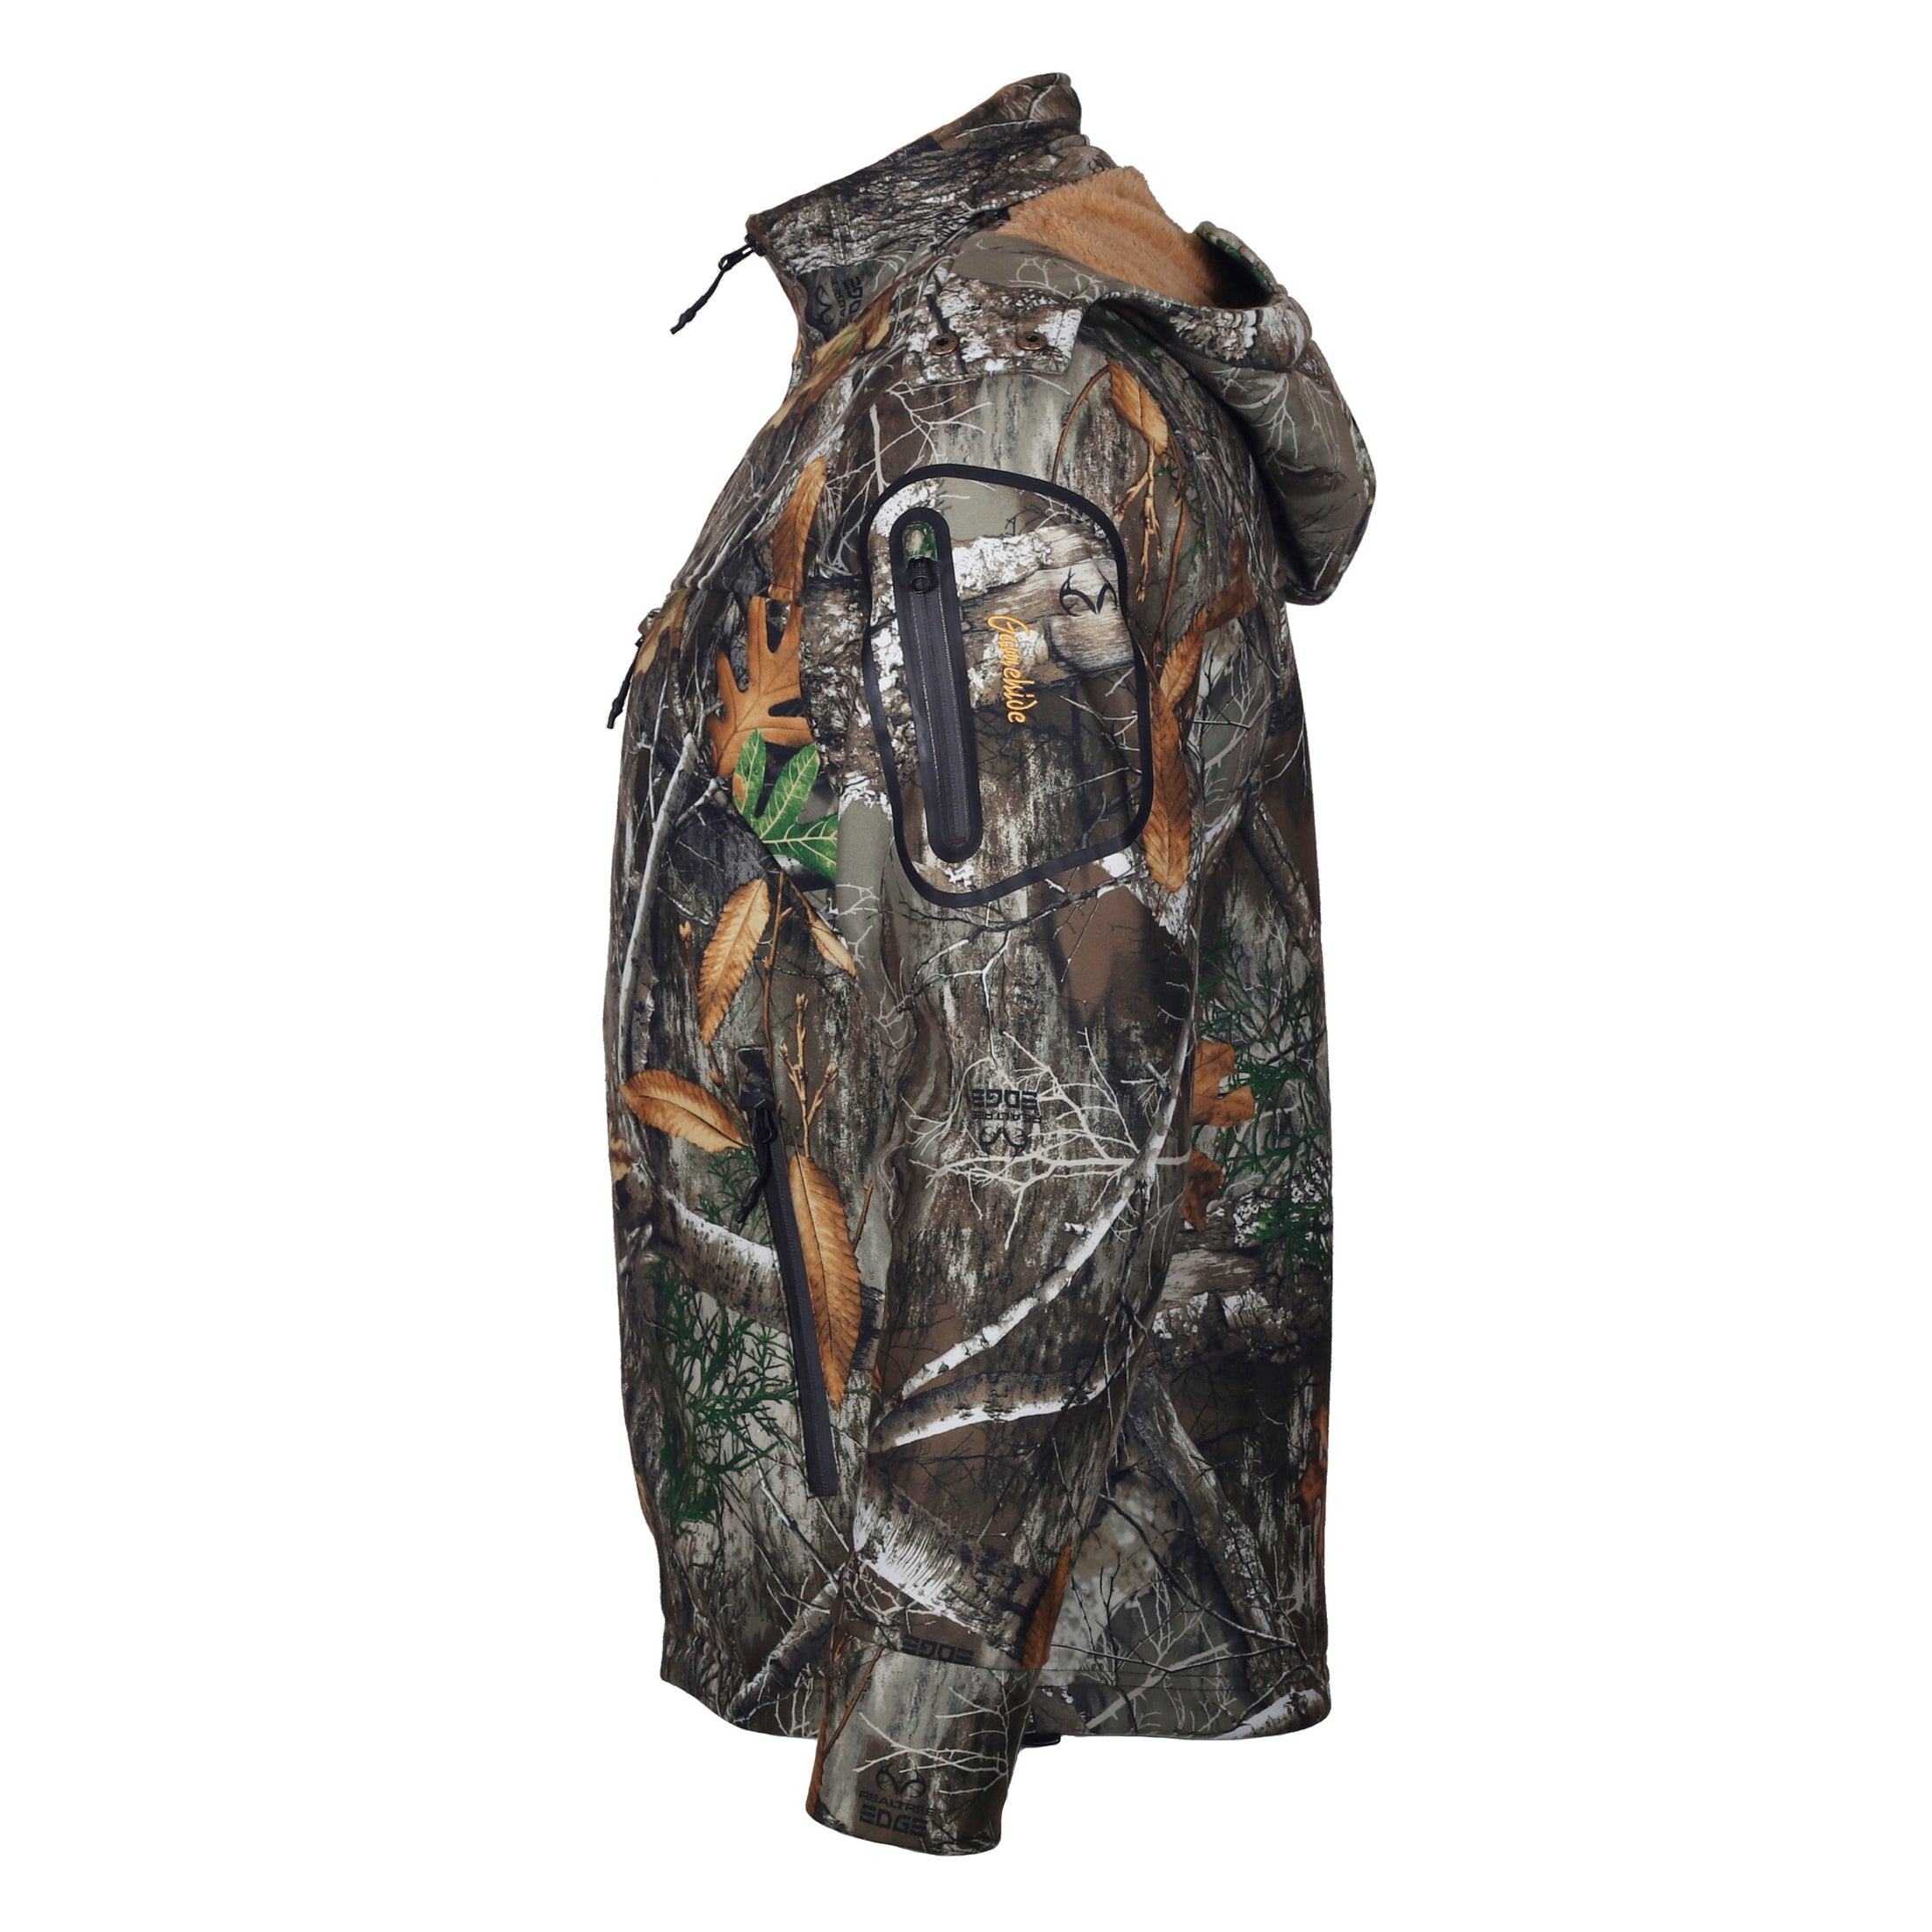 gamehide whitetail jacket side view (realtree edge)